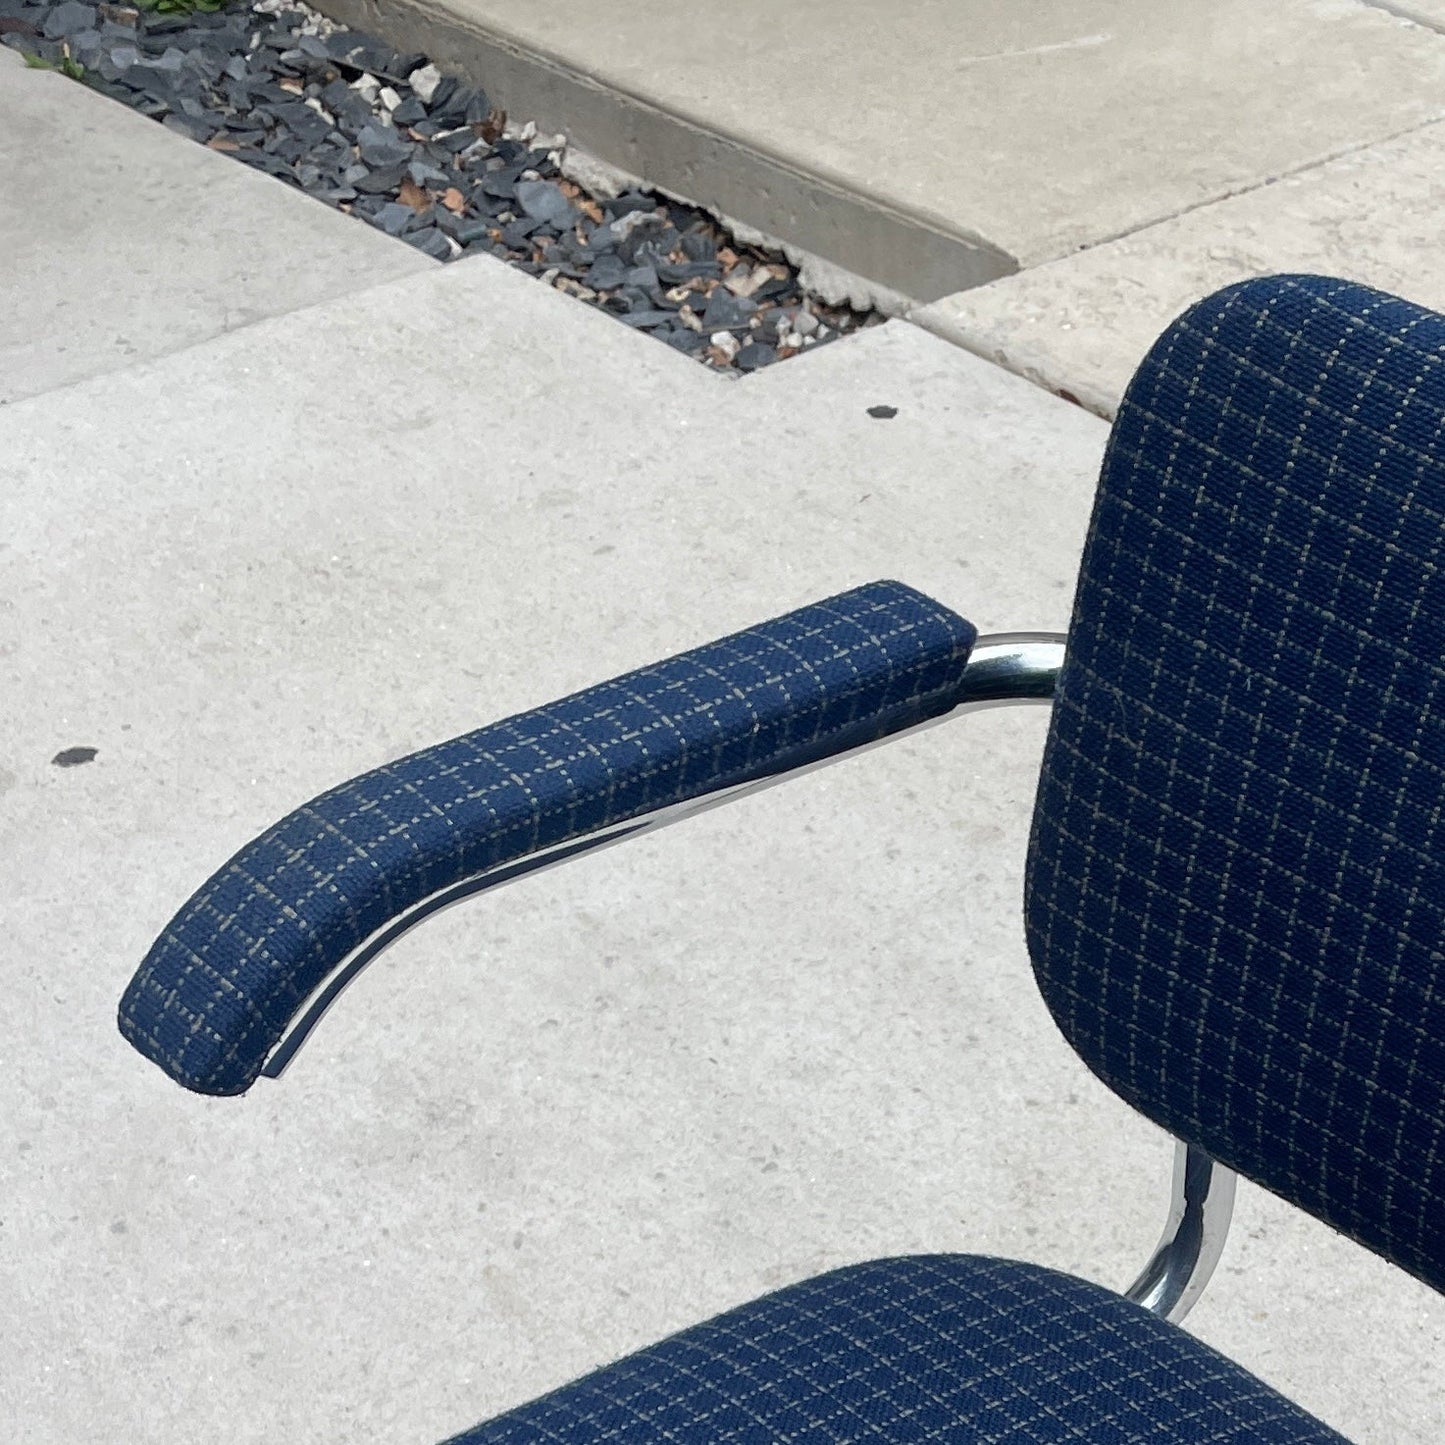 Knoll Cesca Chairs in Plaid Upholstery